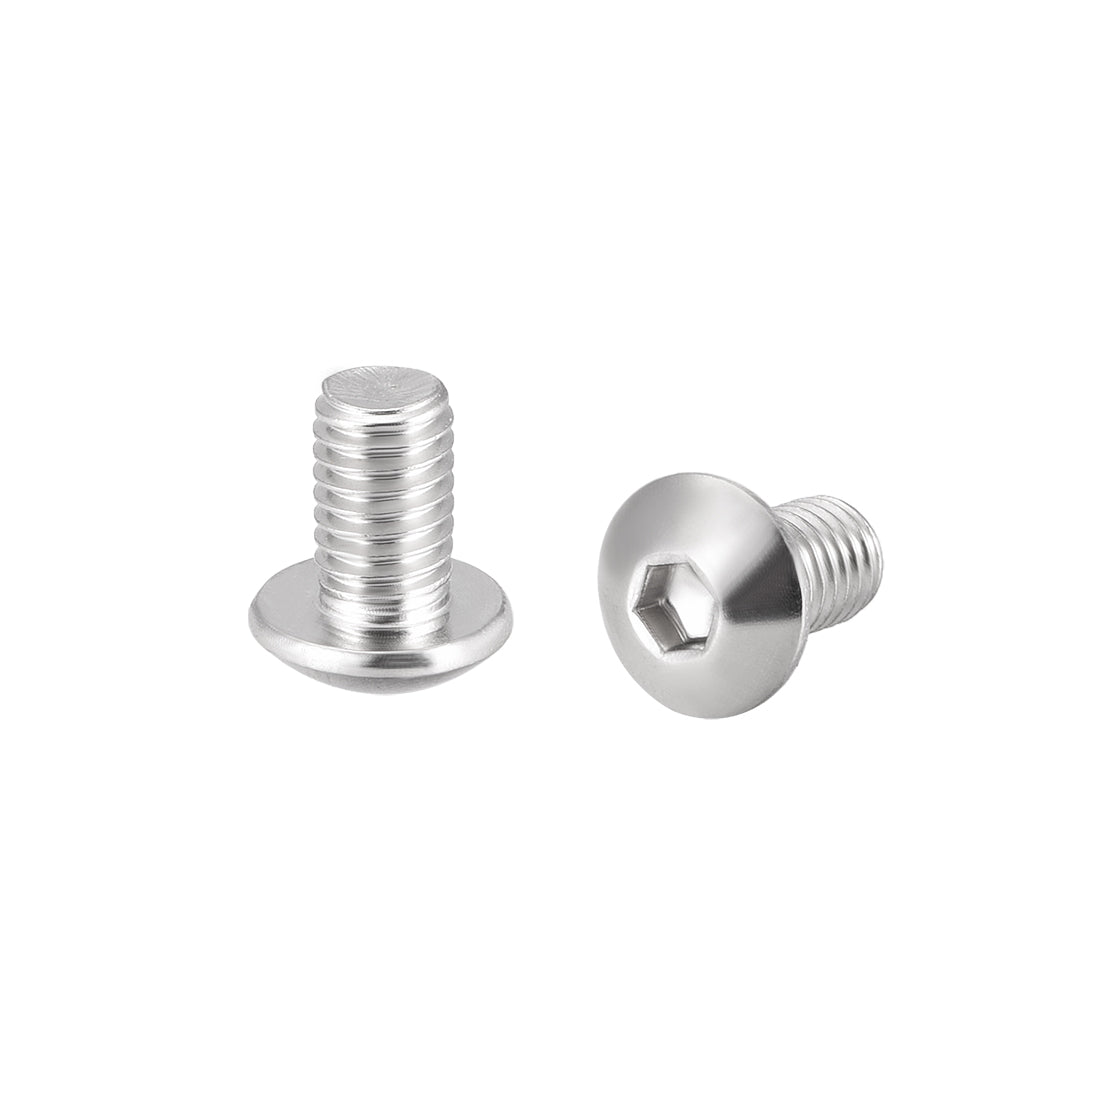 uxcell Uxcell M5x8mm Machine Screws Hex Socket Round Head Screw 304 Stainless Steel Fasteners Bolts 20pcs